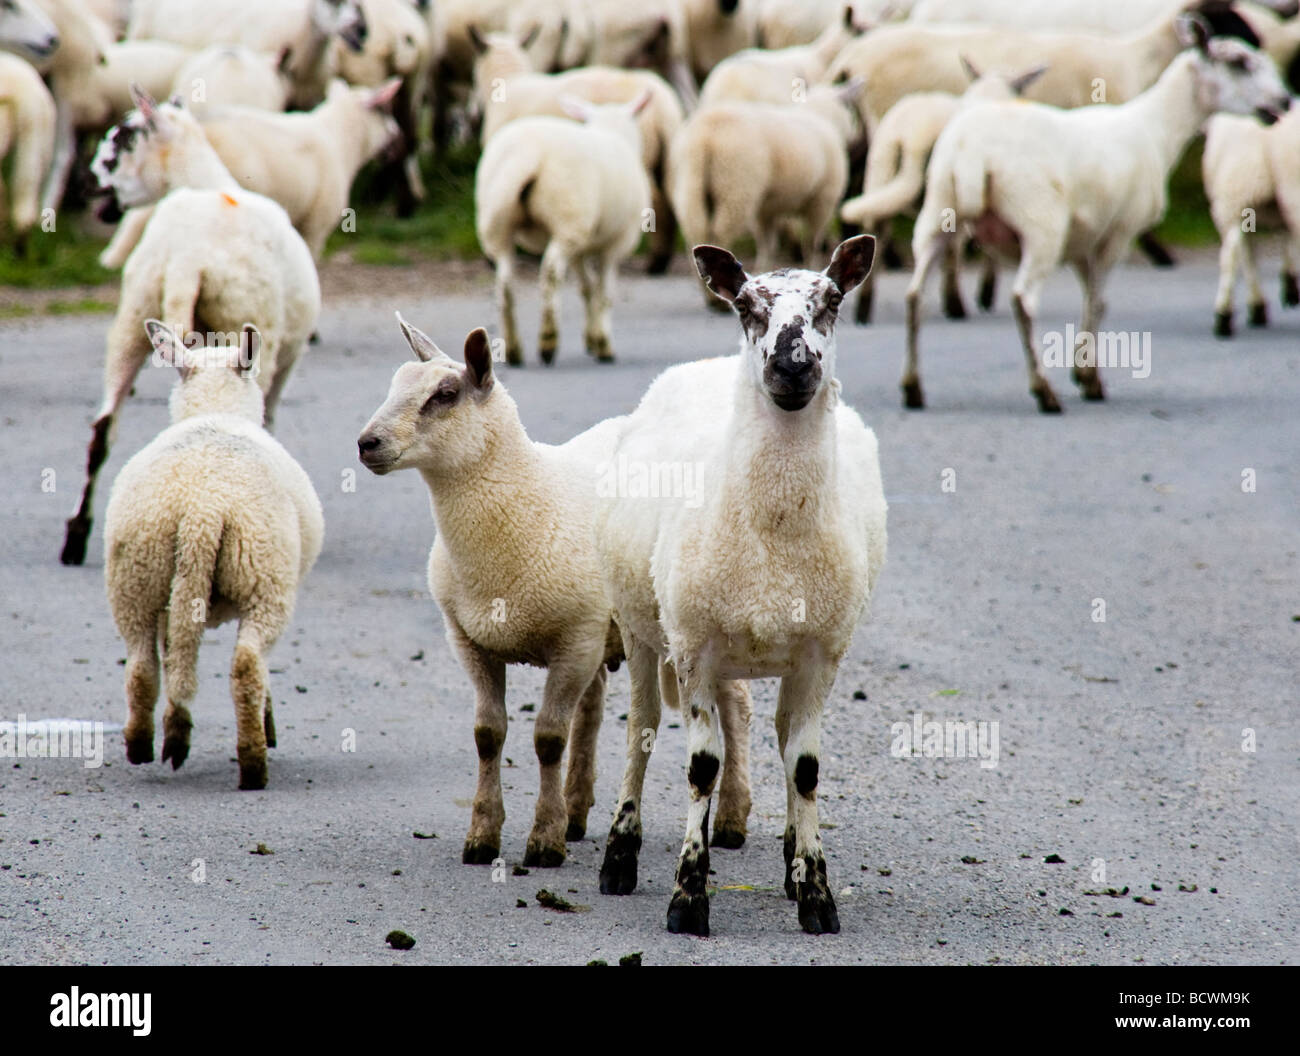 Sheep on the Road Stock Photo